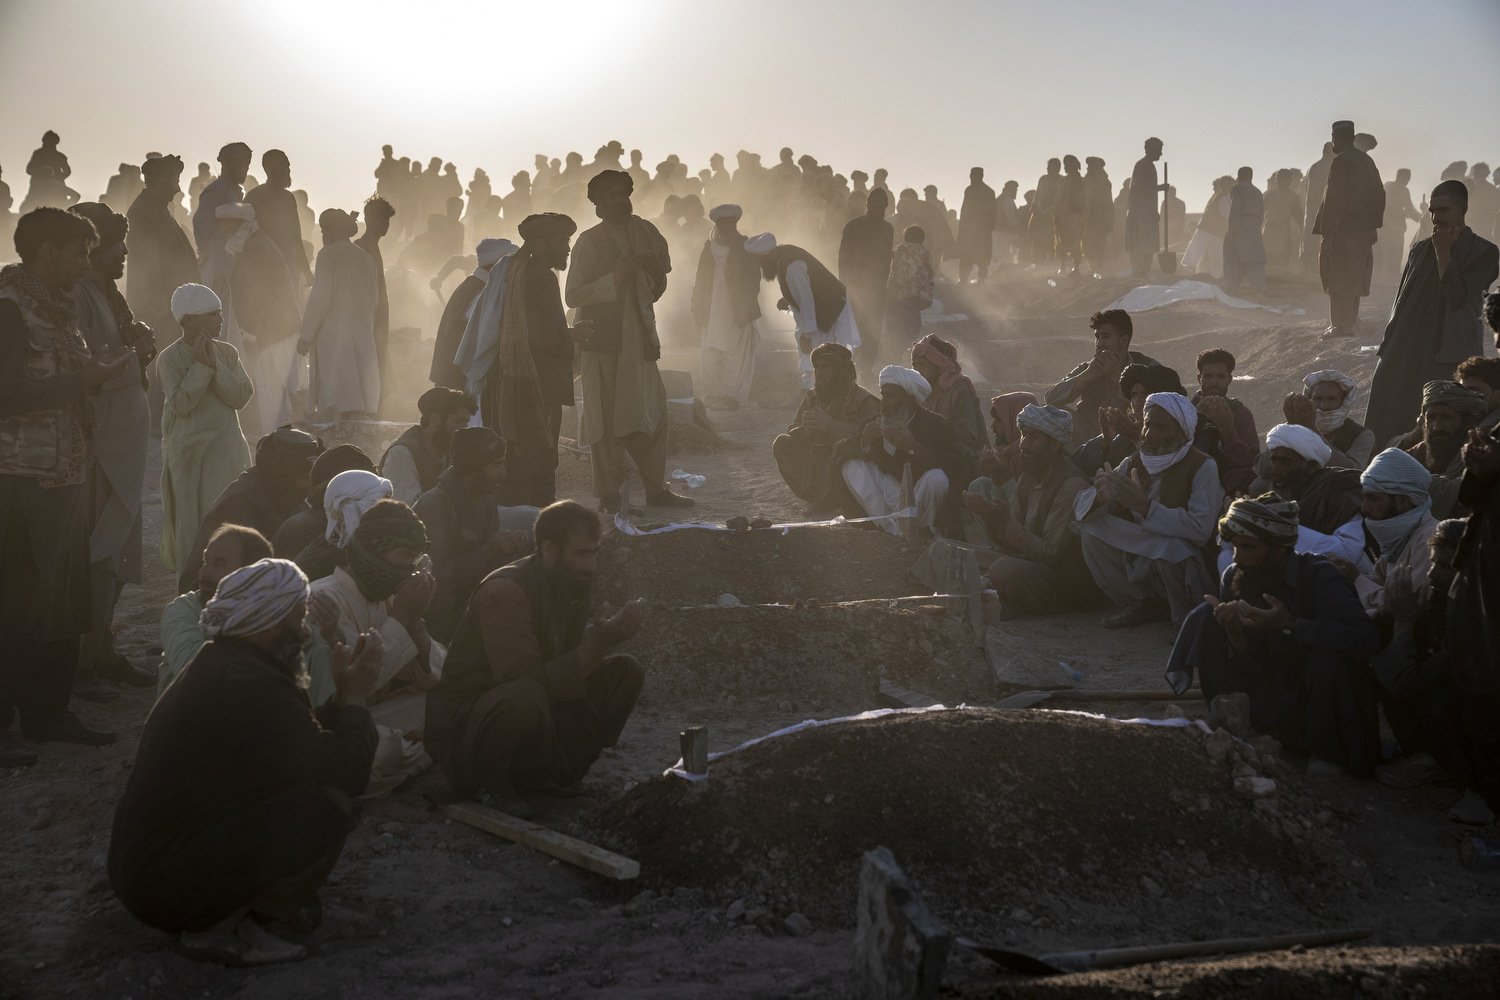  Afghans bury hundreds of people killed in an earthquake to a burial site, in a village in Zenda Jan district in Herat province, western of Afghanistan, Monday, Oct. 9, 2023. Saturday's deadly earthquake killed and injured thousands when it leveled a